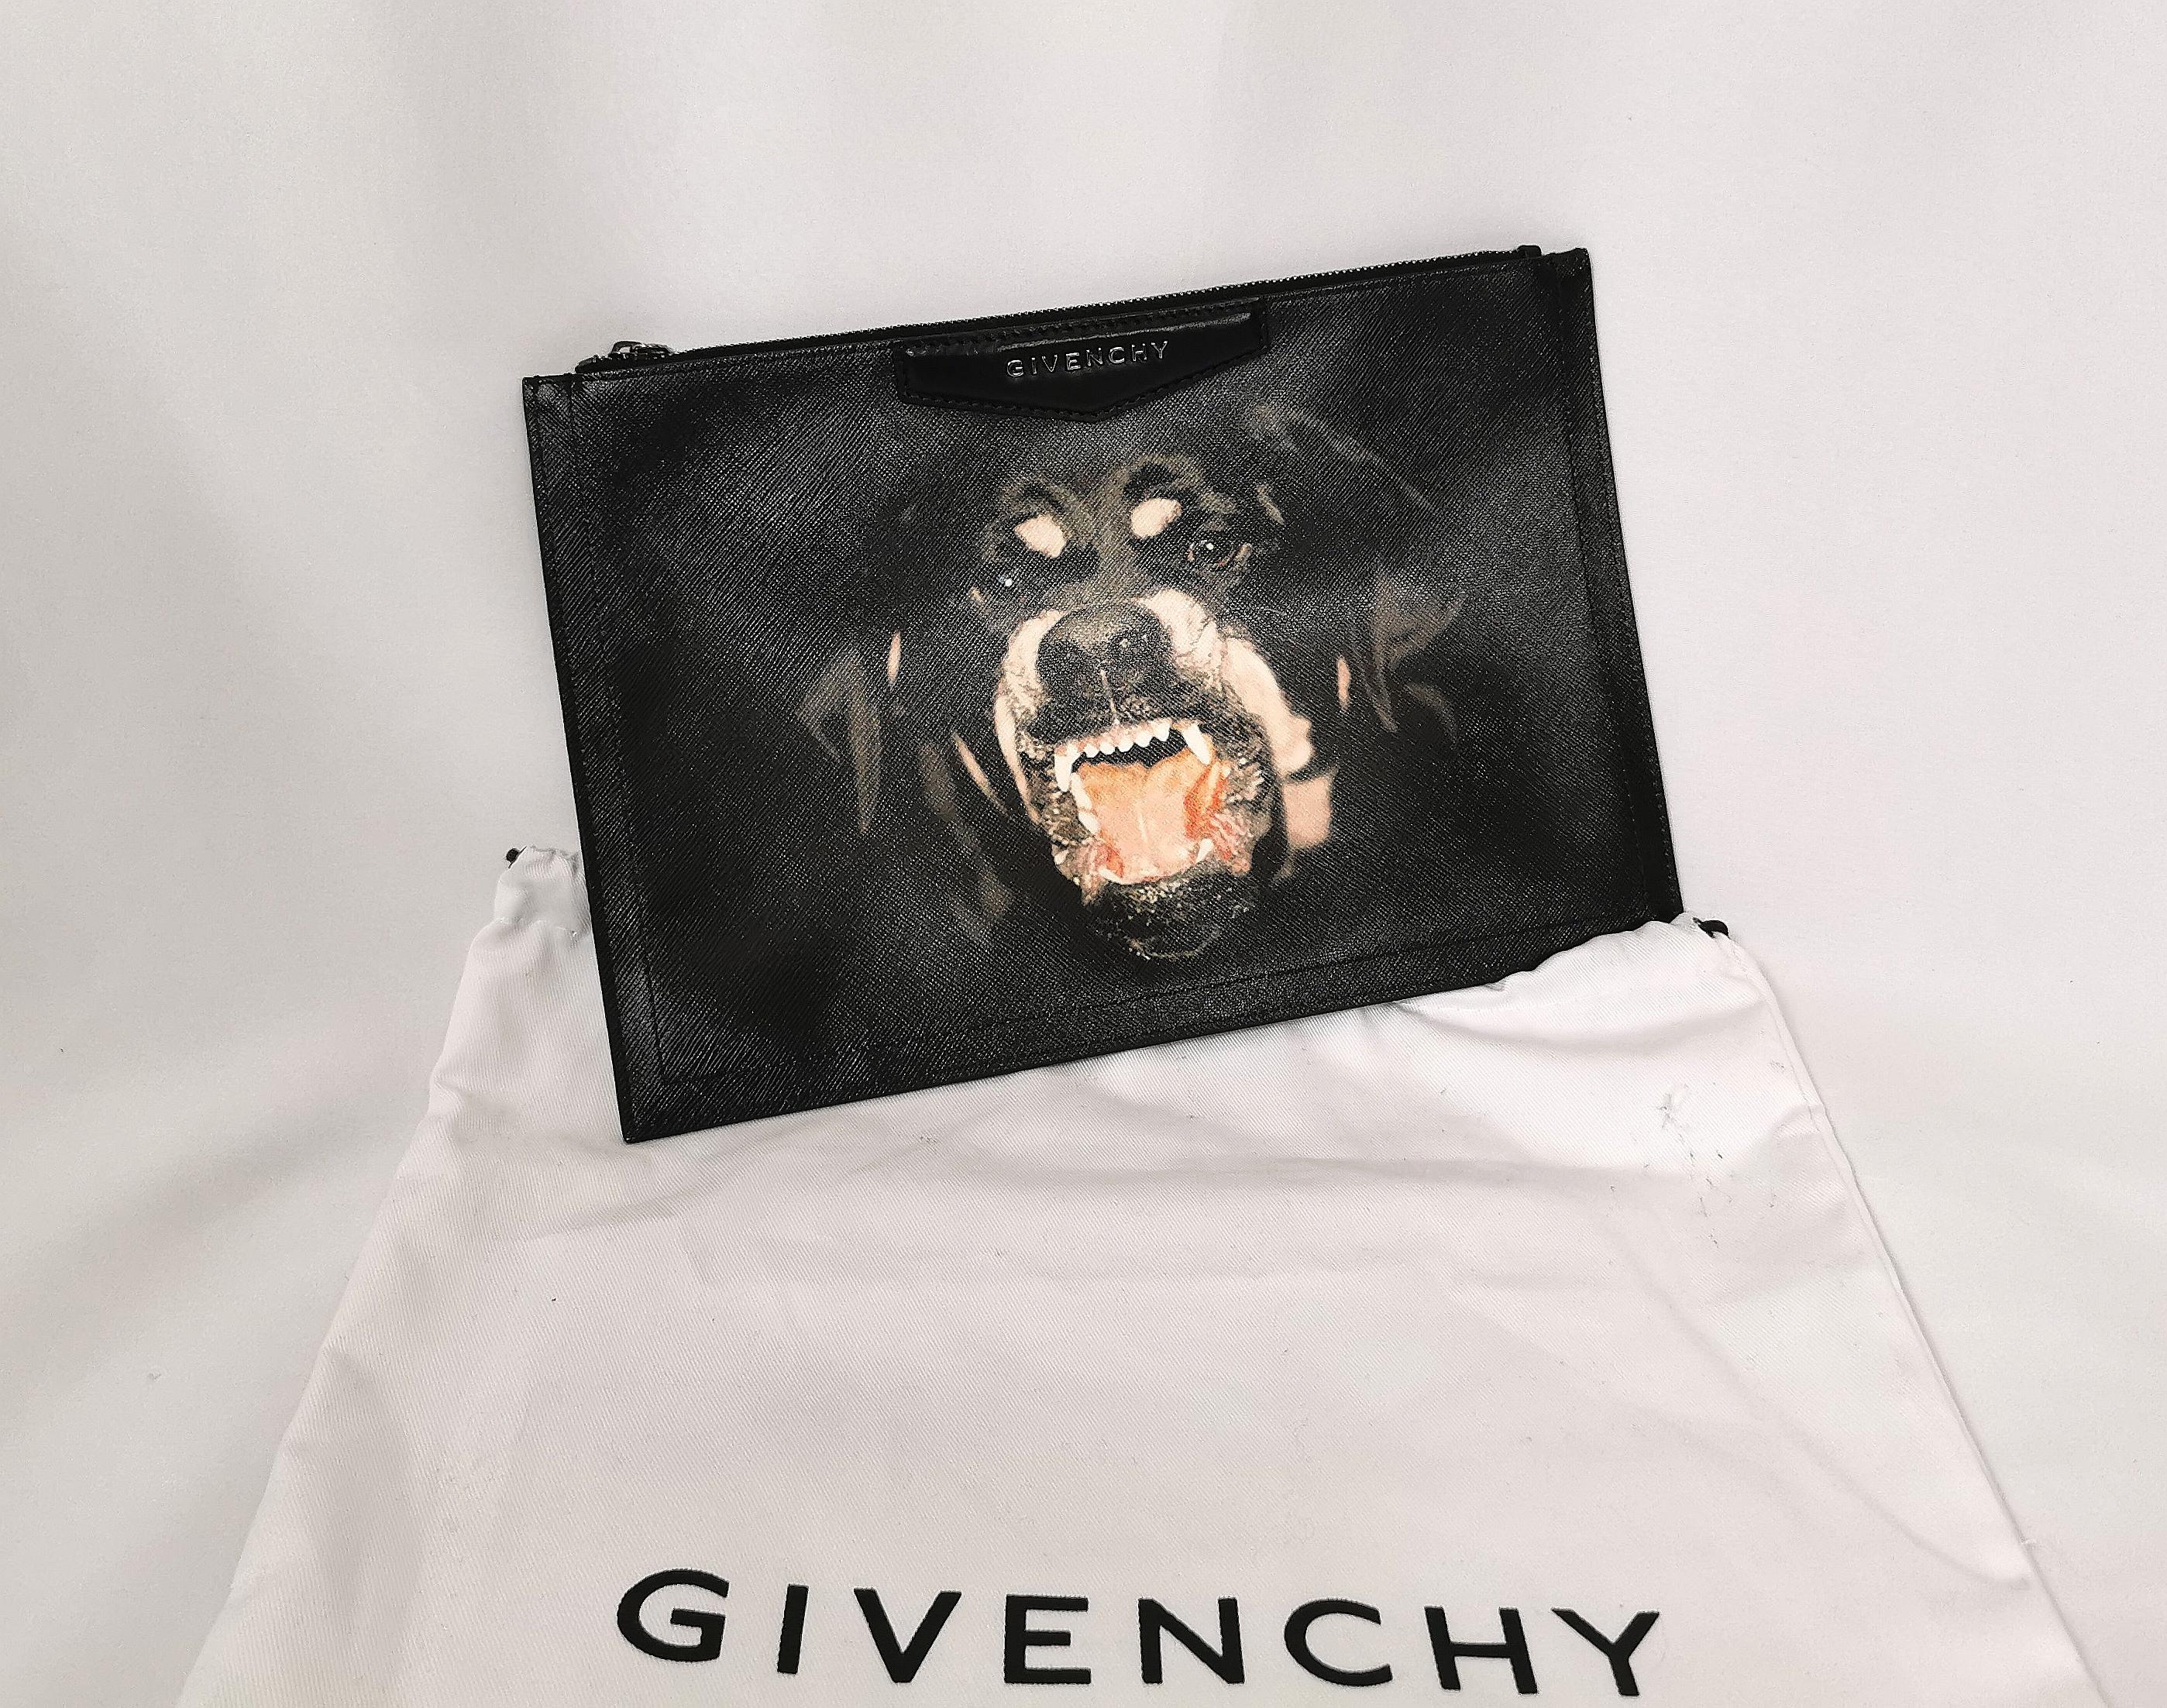 givenchy rotweiler